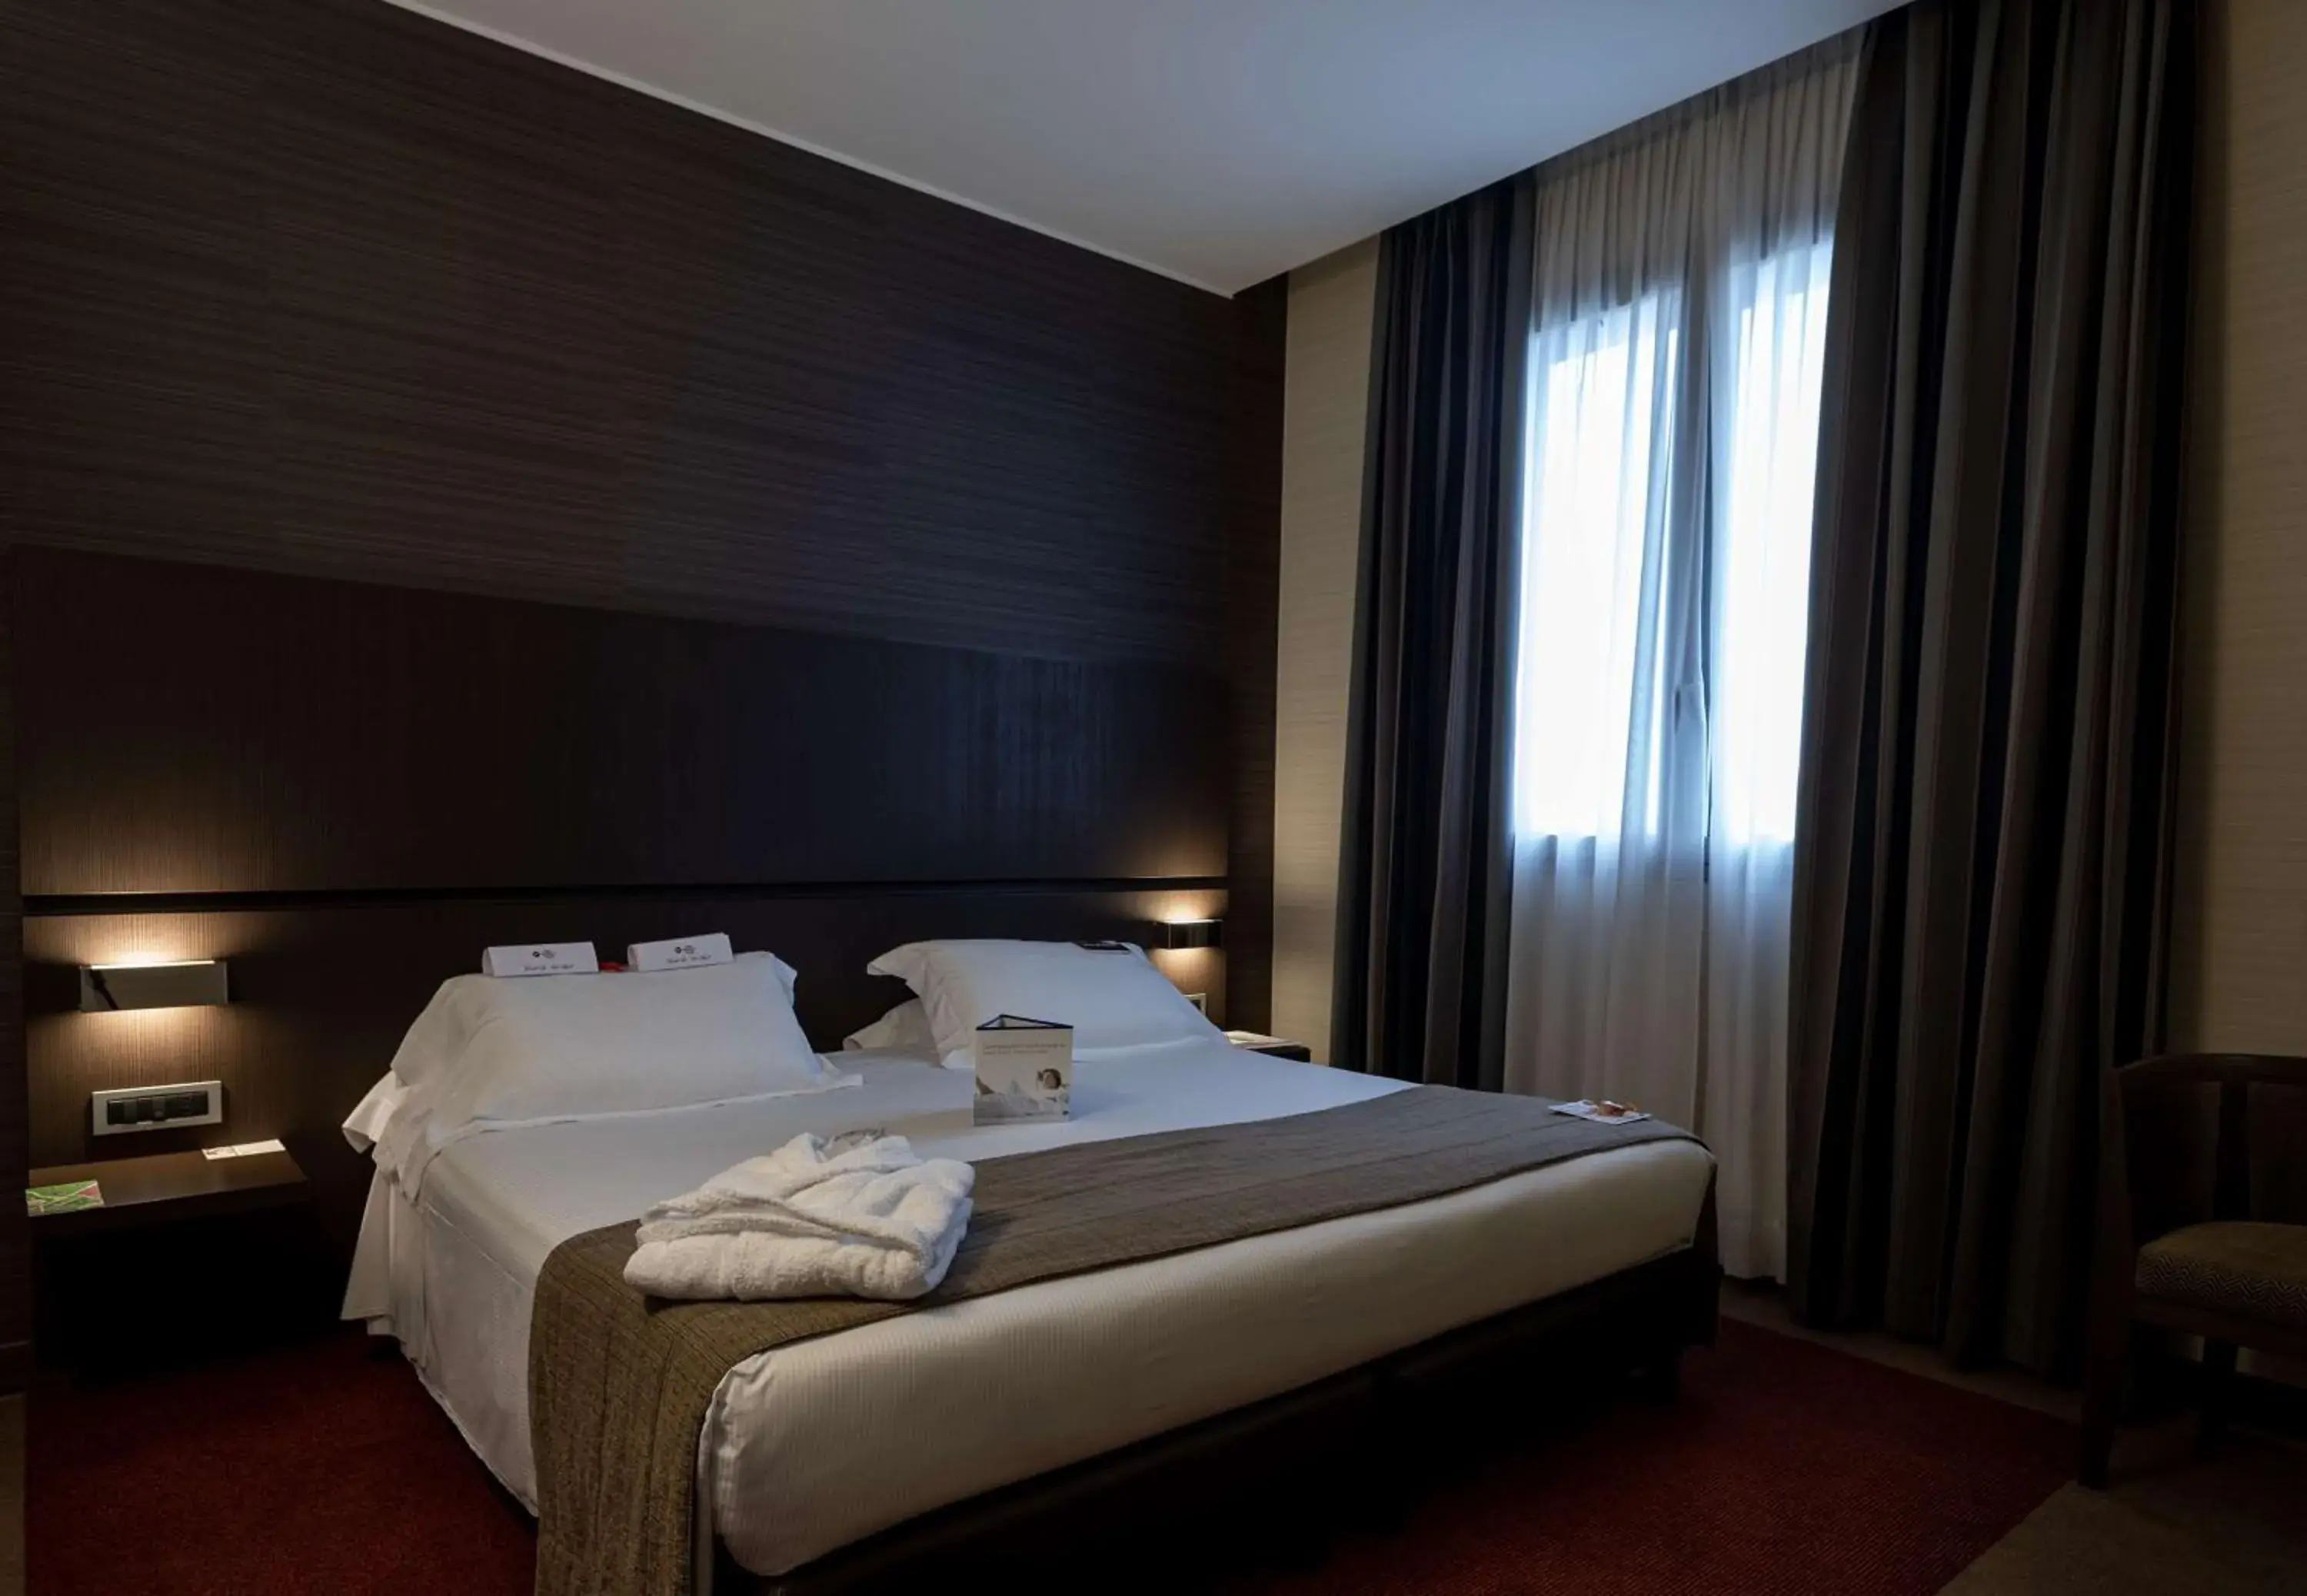 Bedroom, Bed in Best Western Premier Hotel Monza E Brianza Palace